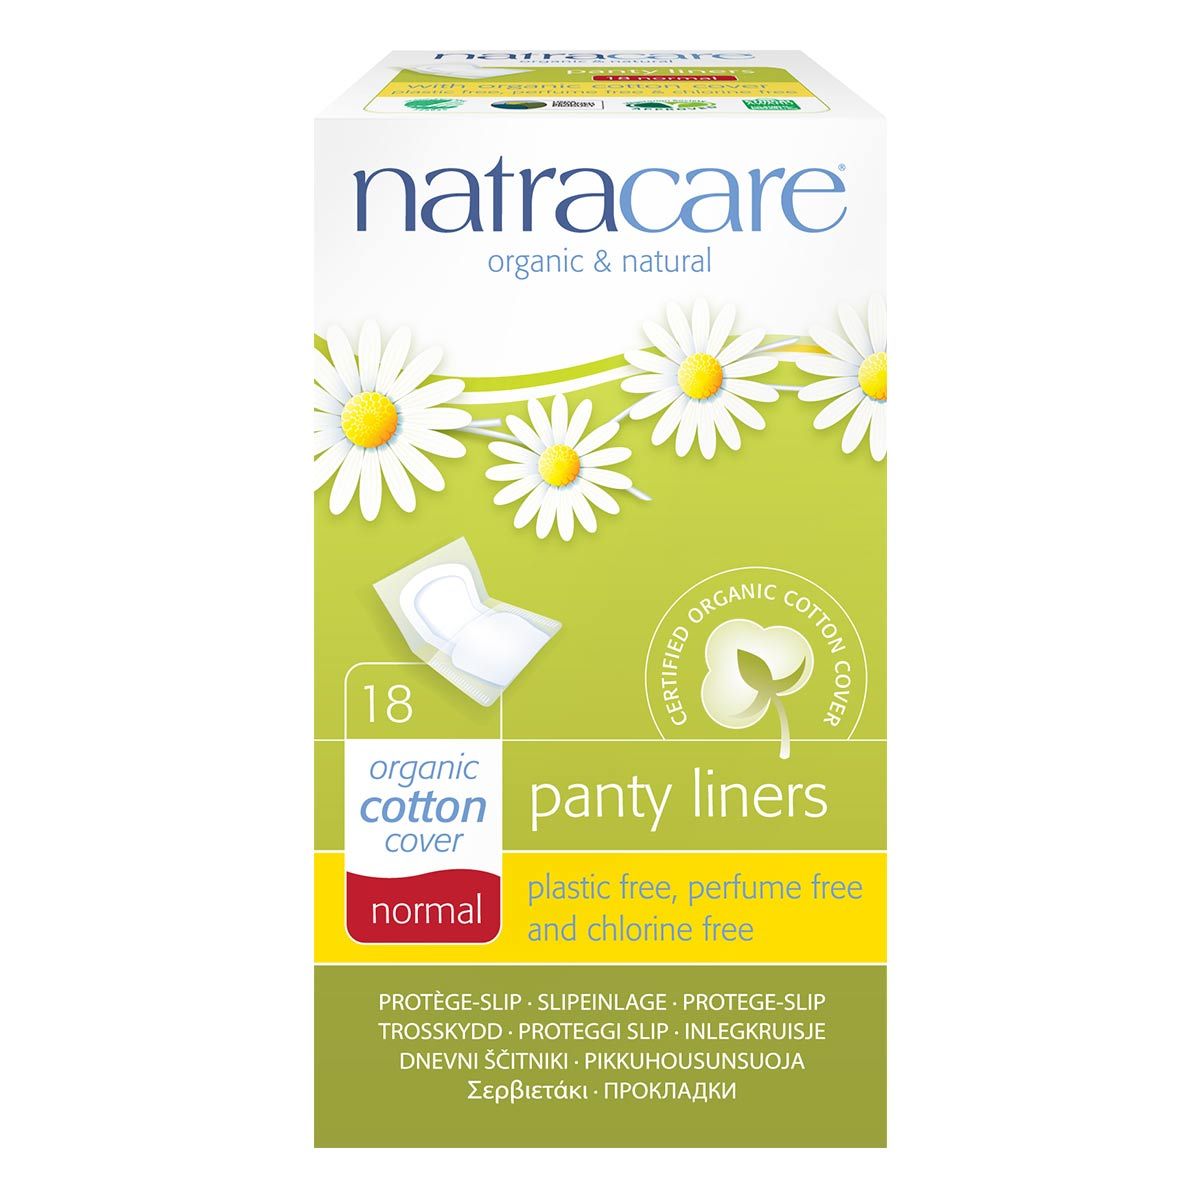 Primary image of Panty Liners - Organic Cotton